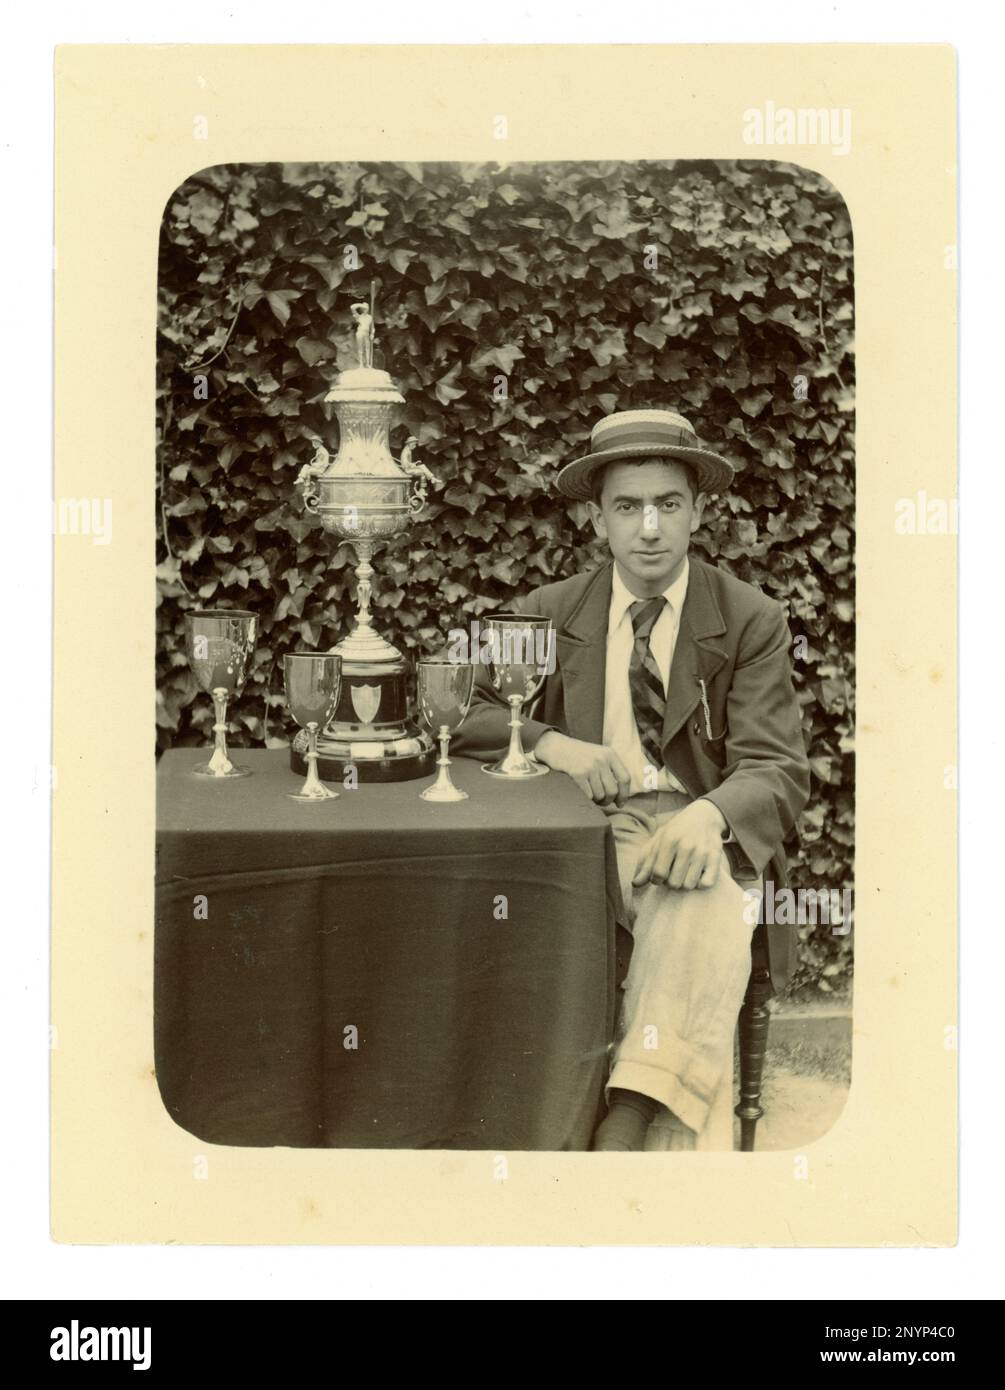 Original Victorian photograph of gent, wearing a jacket, club tie and boater. On a table there is displayed a large Worcester challenge vase, / regatta trophy for rowing, and other cups,  Possibly member of a coxed four crew. Worcester area, U.K.  circa 1897-1899 Stock Photo